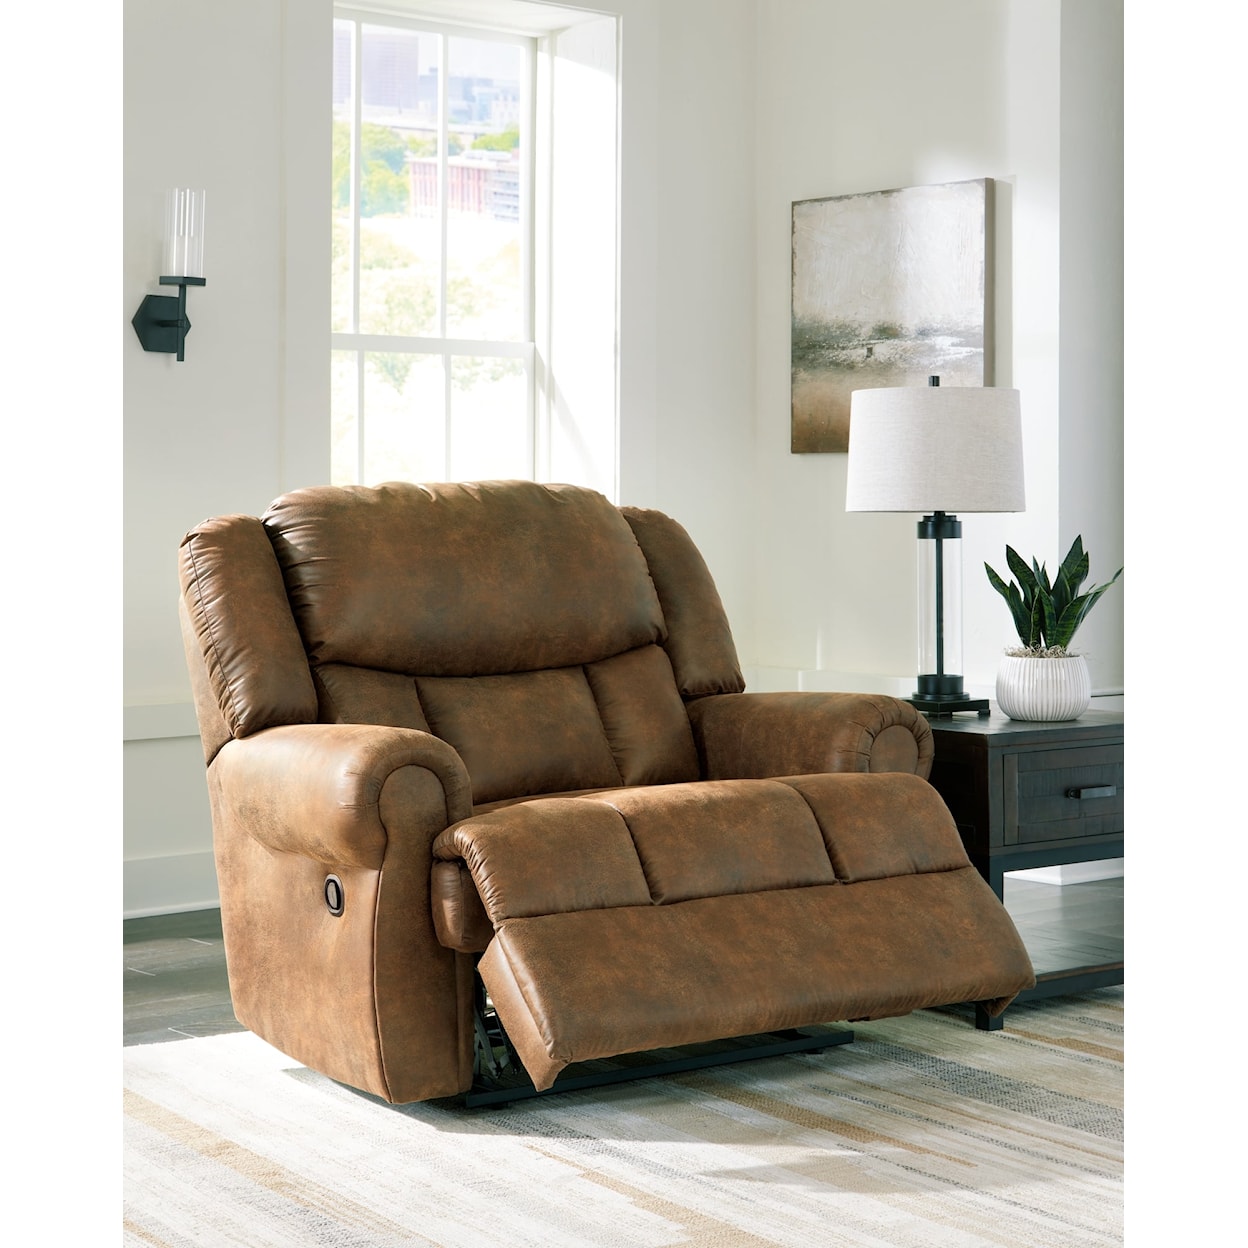 Signature Design by Ashley Furniture Boothbay Wide Seat Recliner